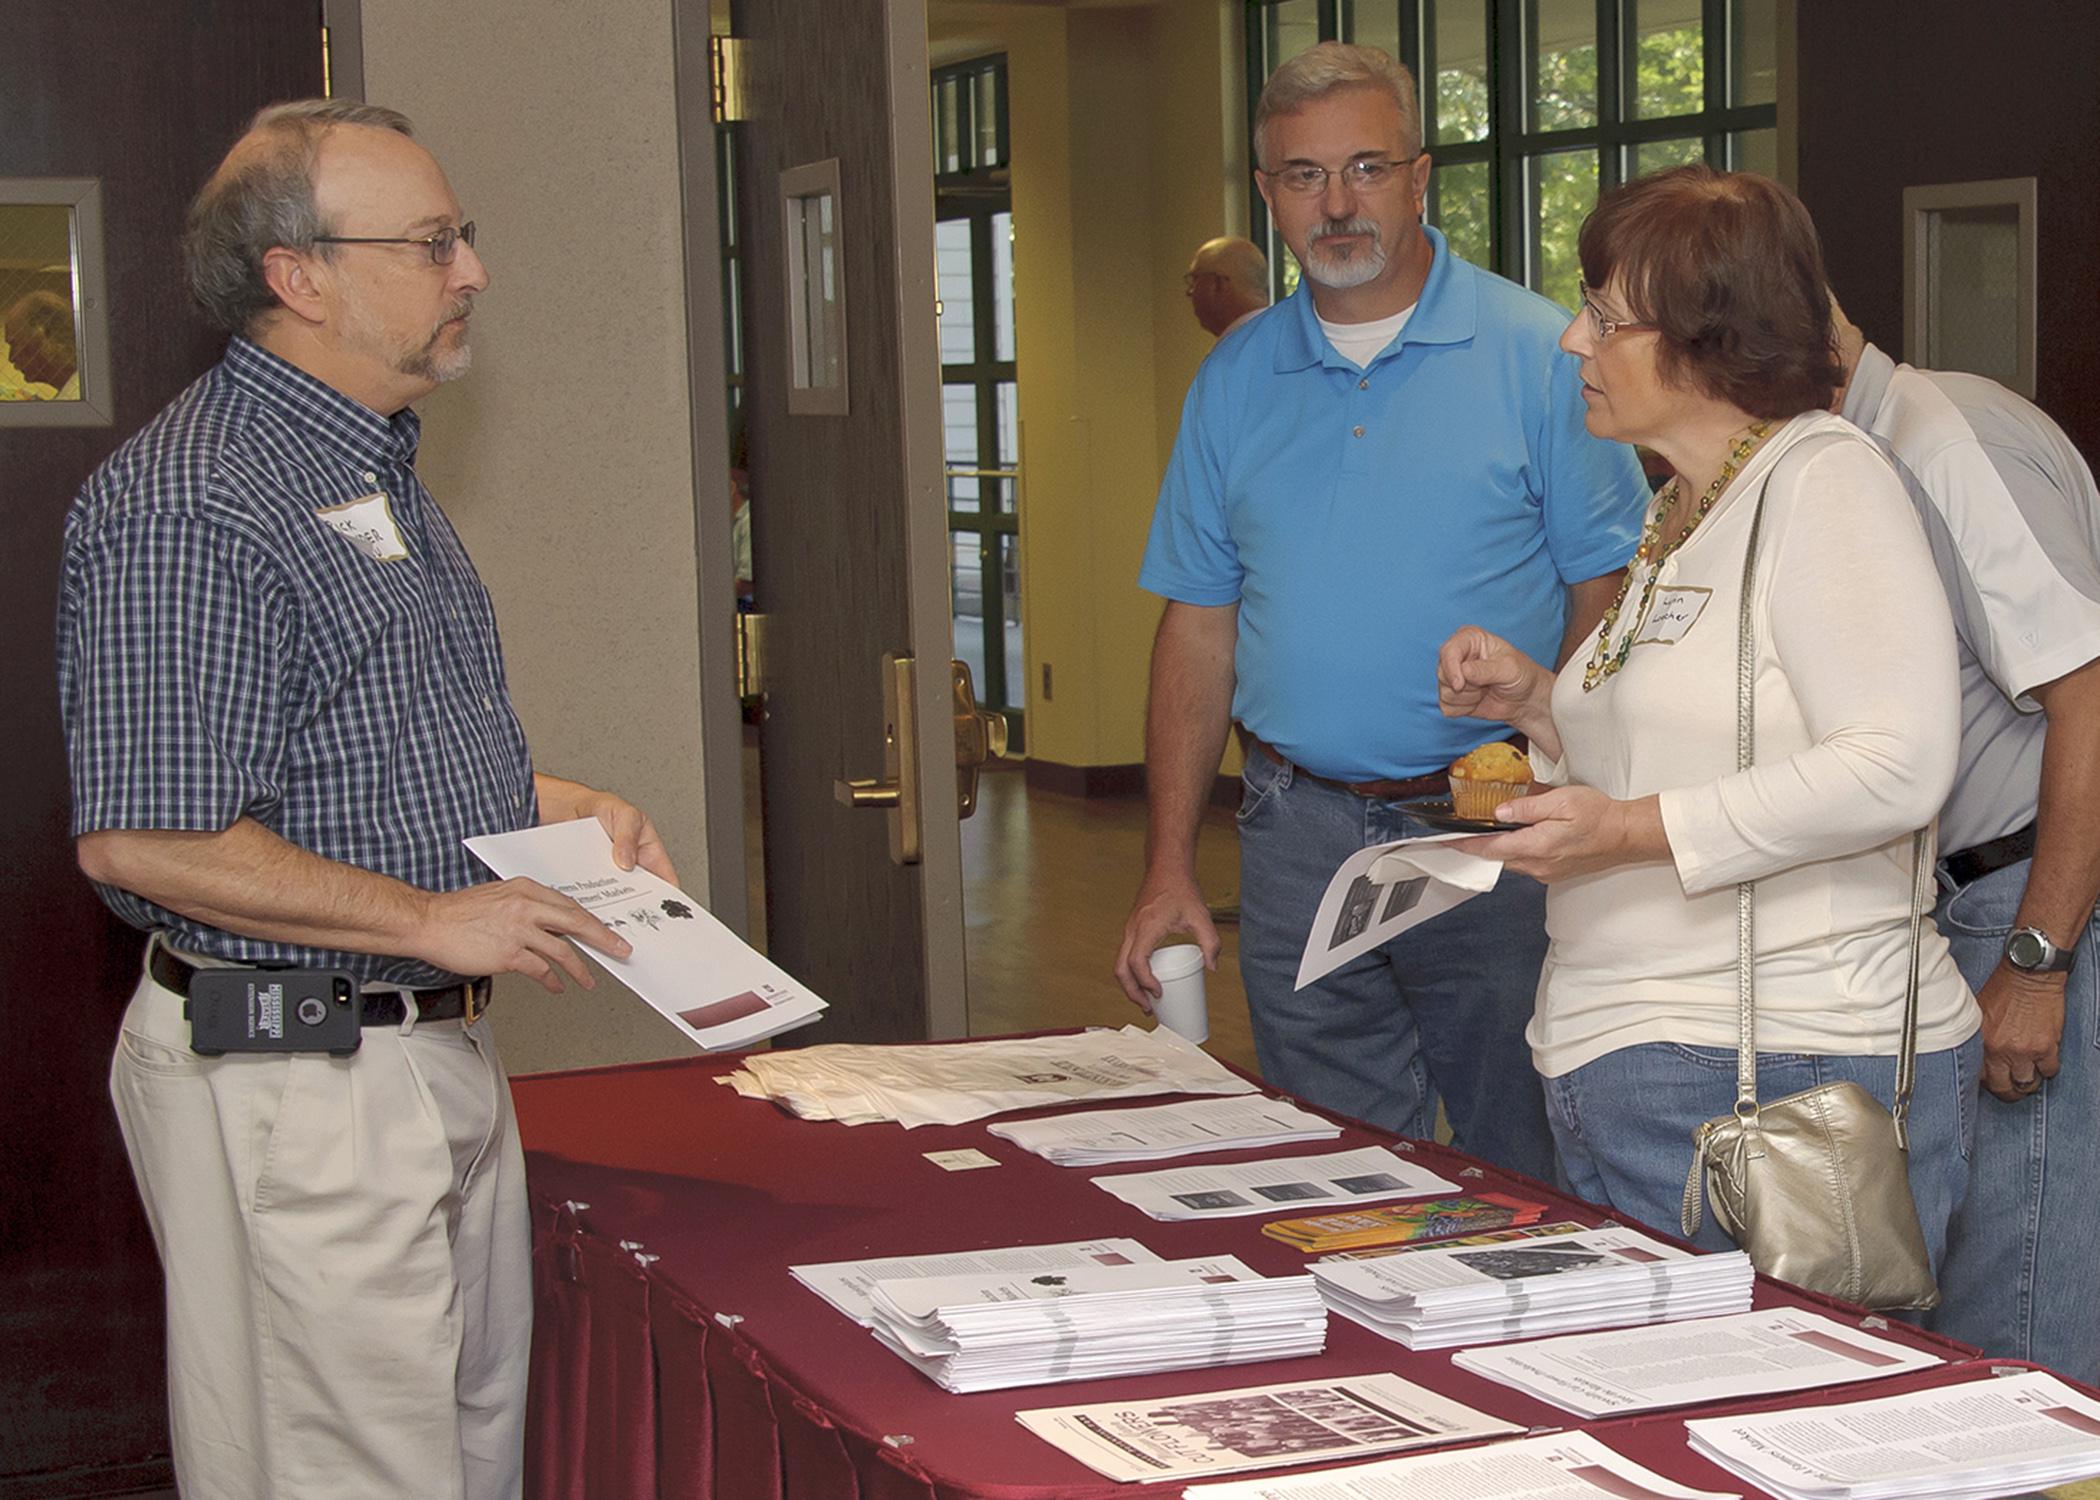 Rick Snyder, Mississippi State University horticulture expert, talks to Joseph Wilson, center, and Lynn Loecher at the microfarming workshop in Raymond on Aug. 28, 2014. The two-day event helped growers understand the benefits and facts of growing for and selling at farmers markets. (Photo by MSU Ag Communications/Kevin Hudson)